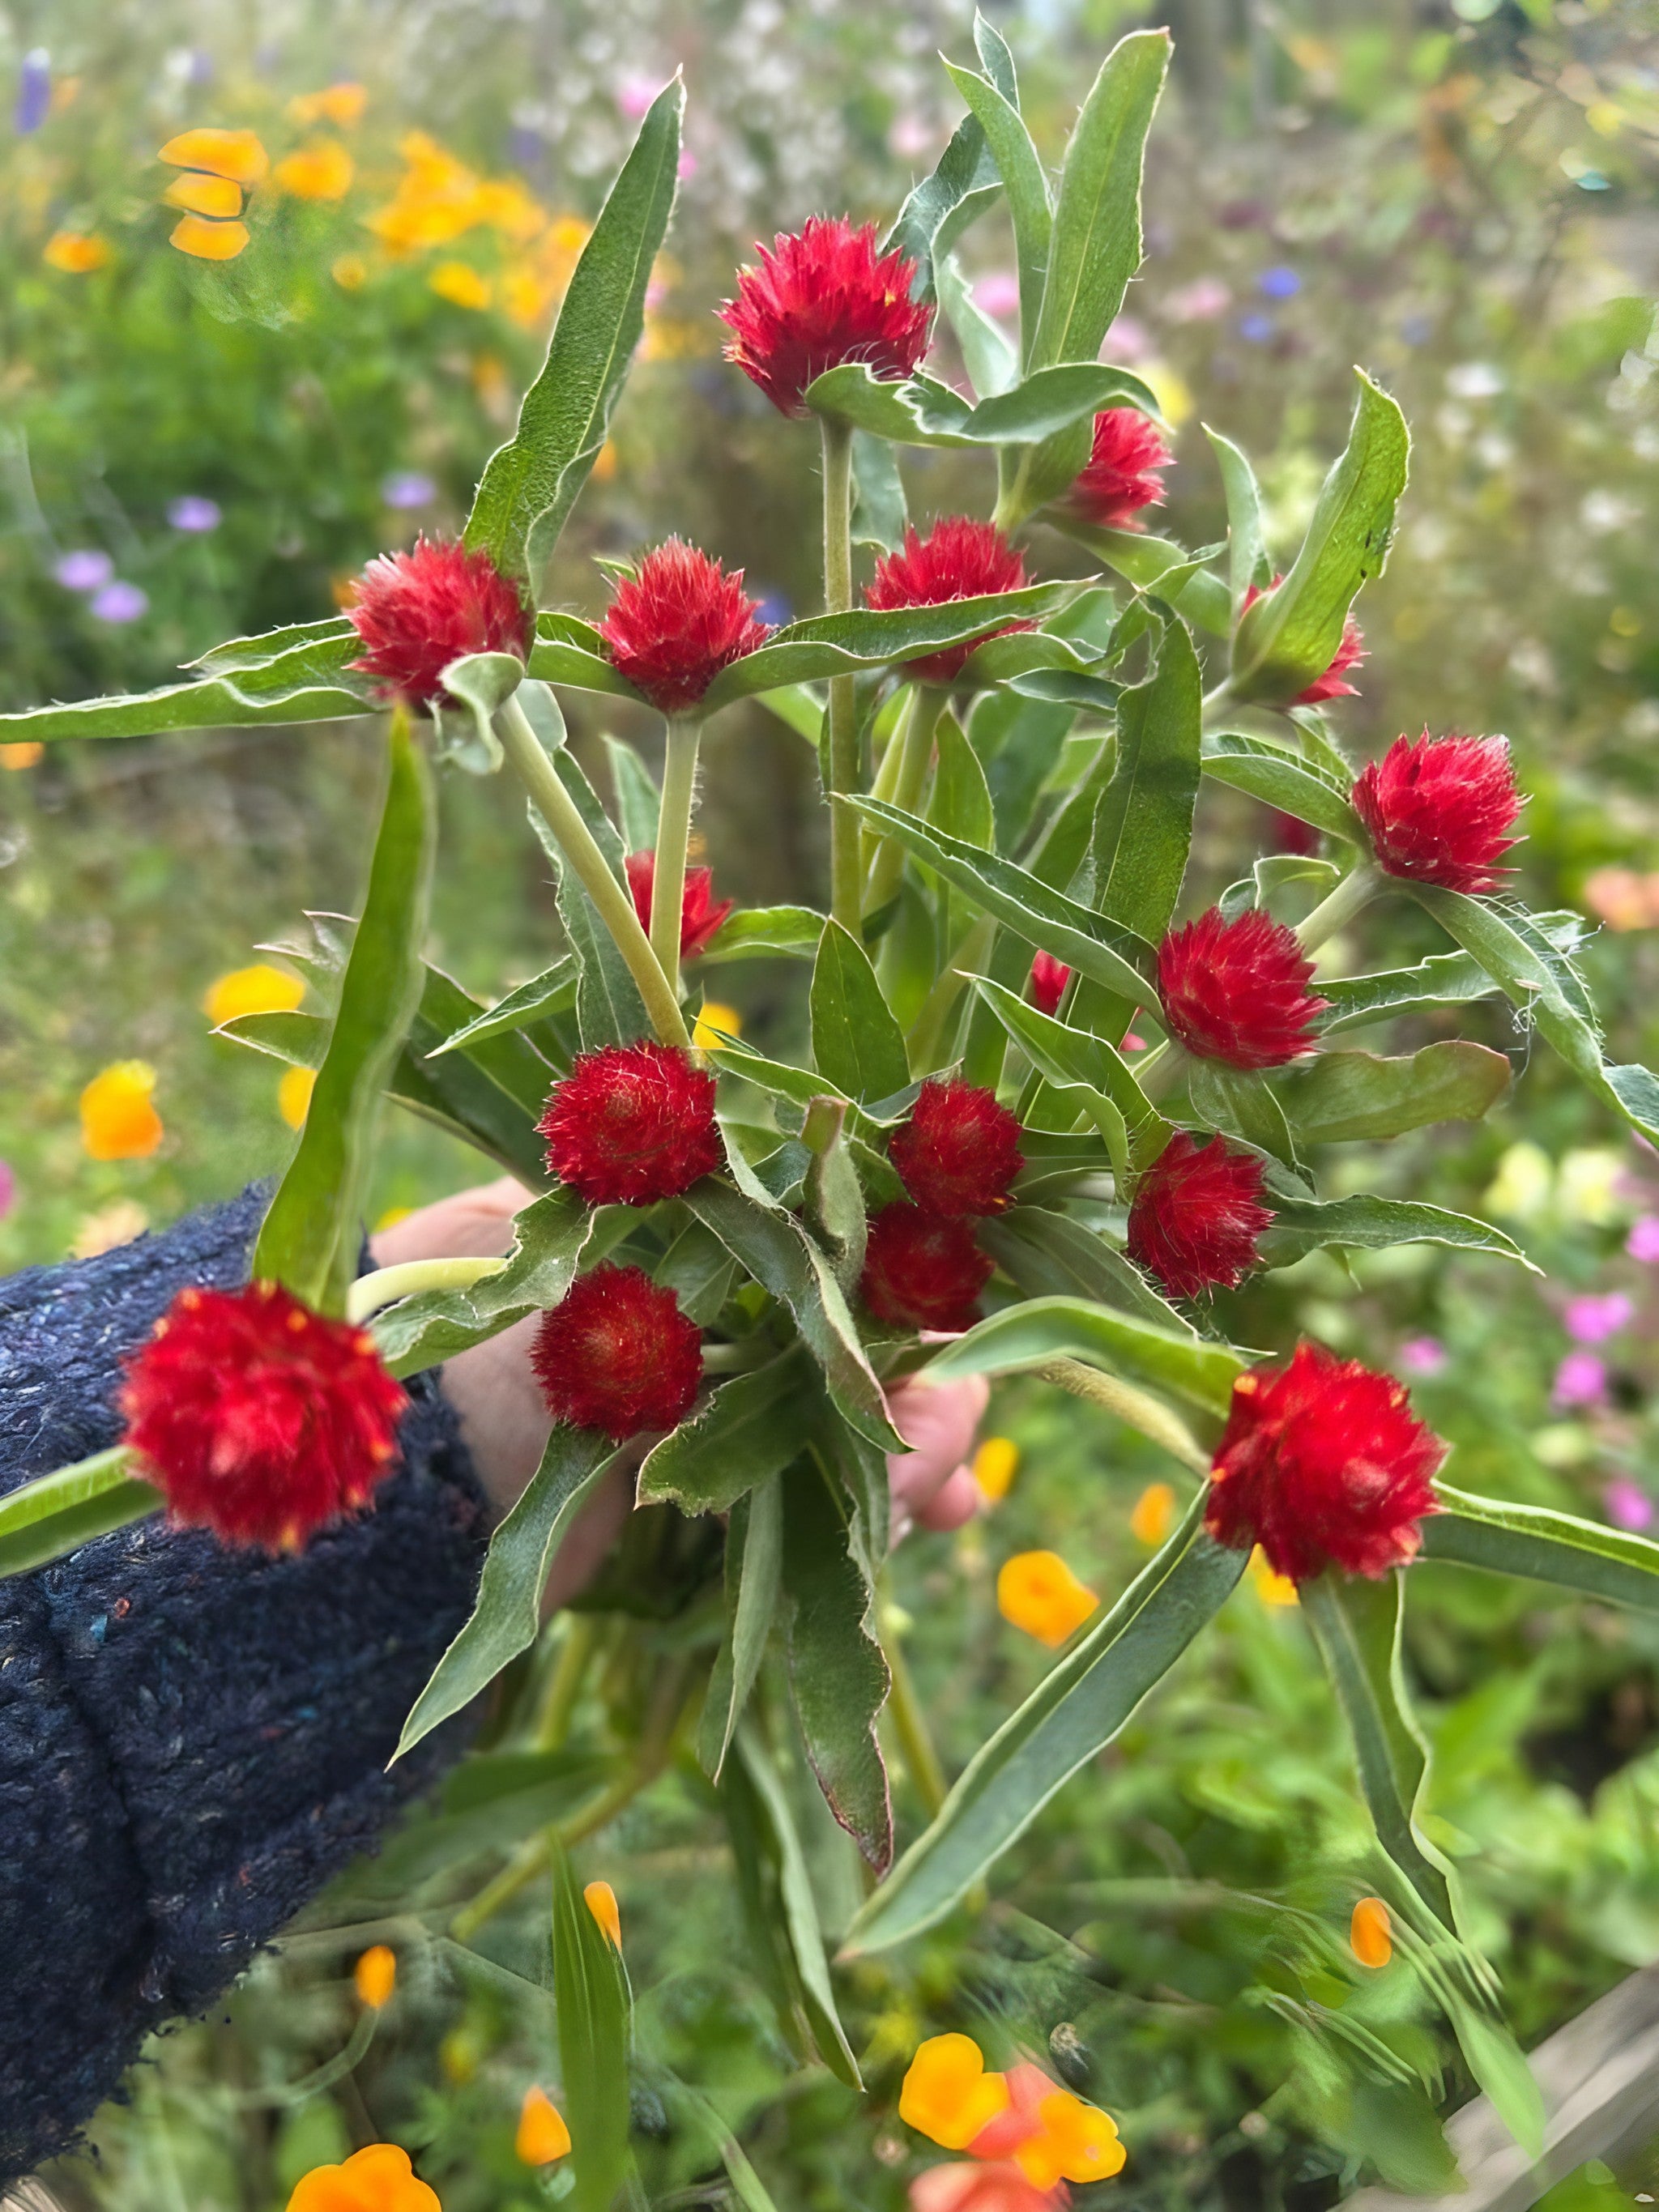 Individual holding a cluster of Gomphrena Strawberry Fields flowers with red globular heads